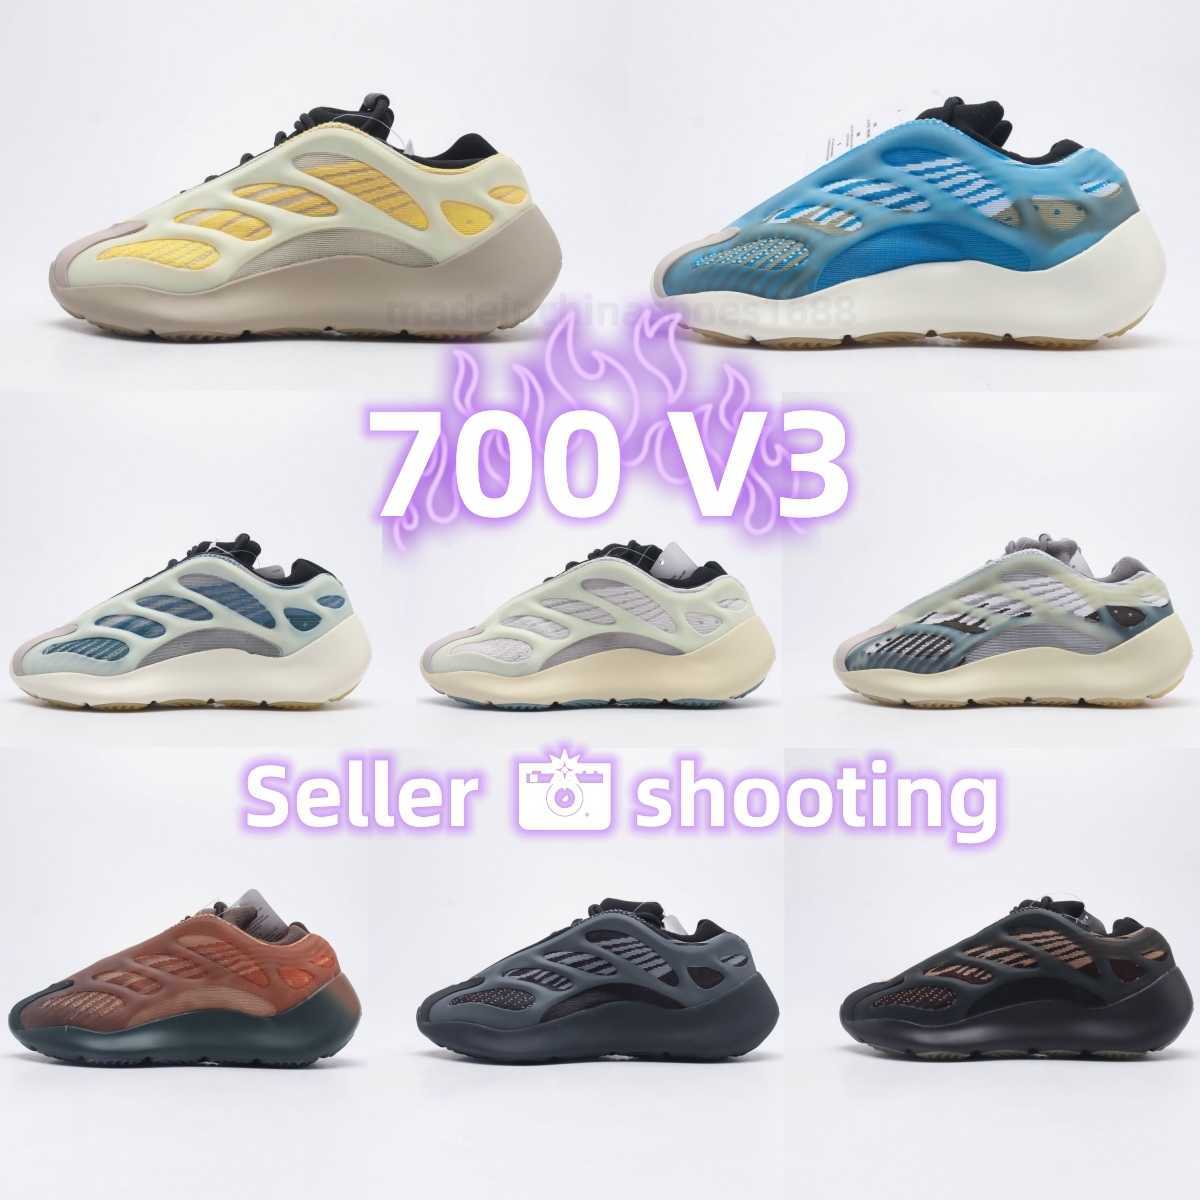 

2023 700s V3 New Designer Running shoes tn Outdoor sneaker boost Top og trainer low Shoes Men Women sports originality casual retro classic 36-45 size, 20